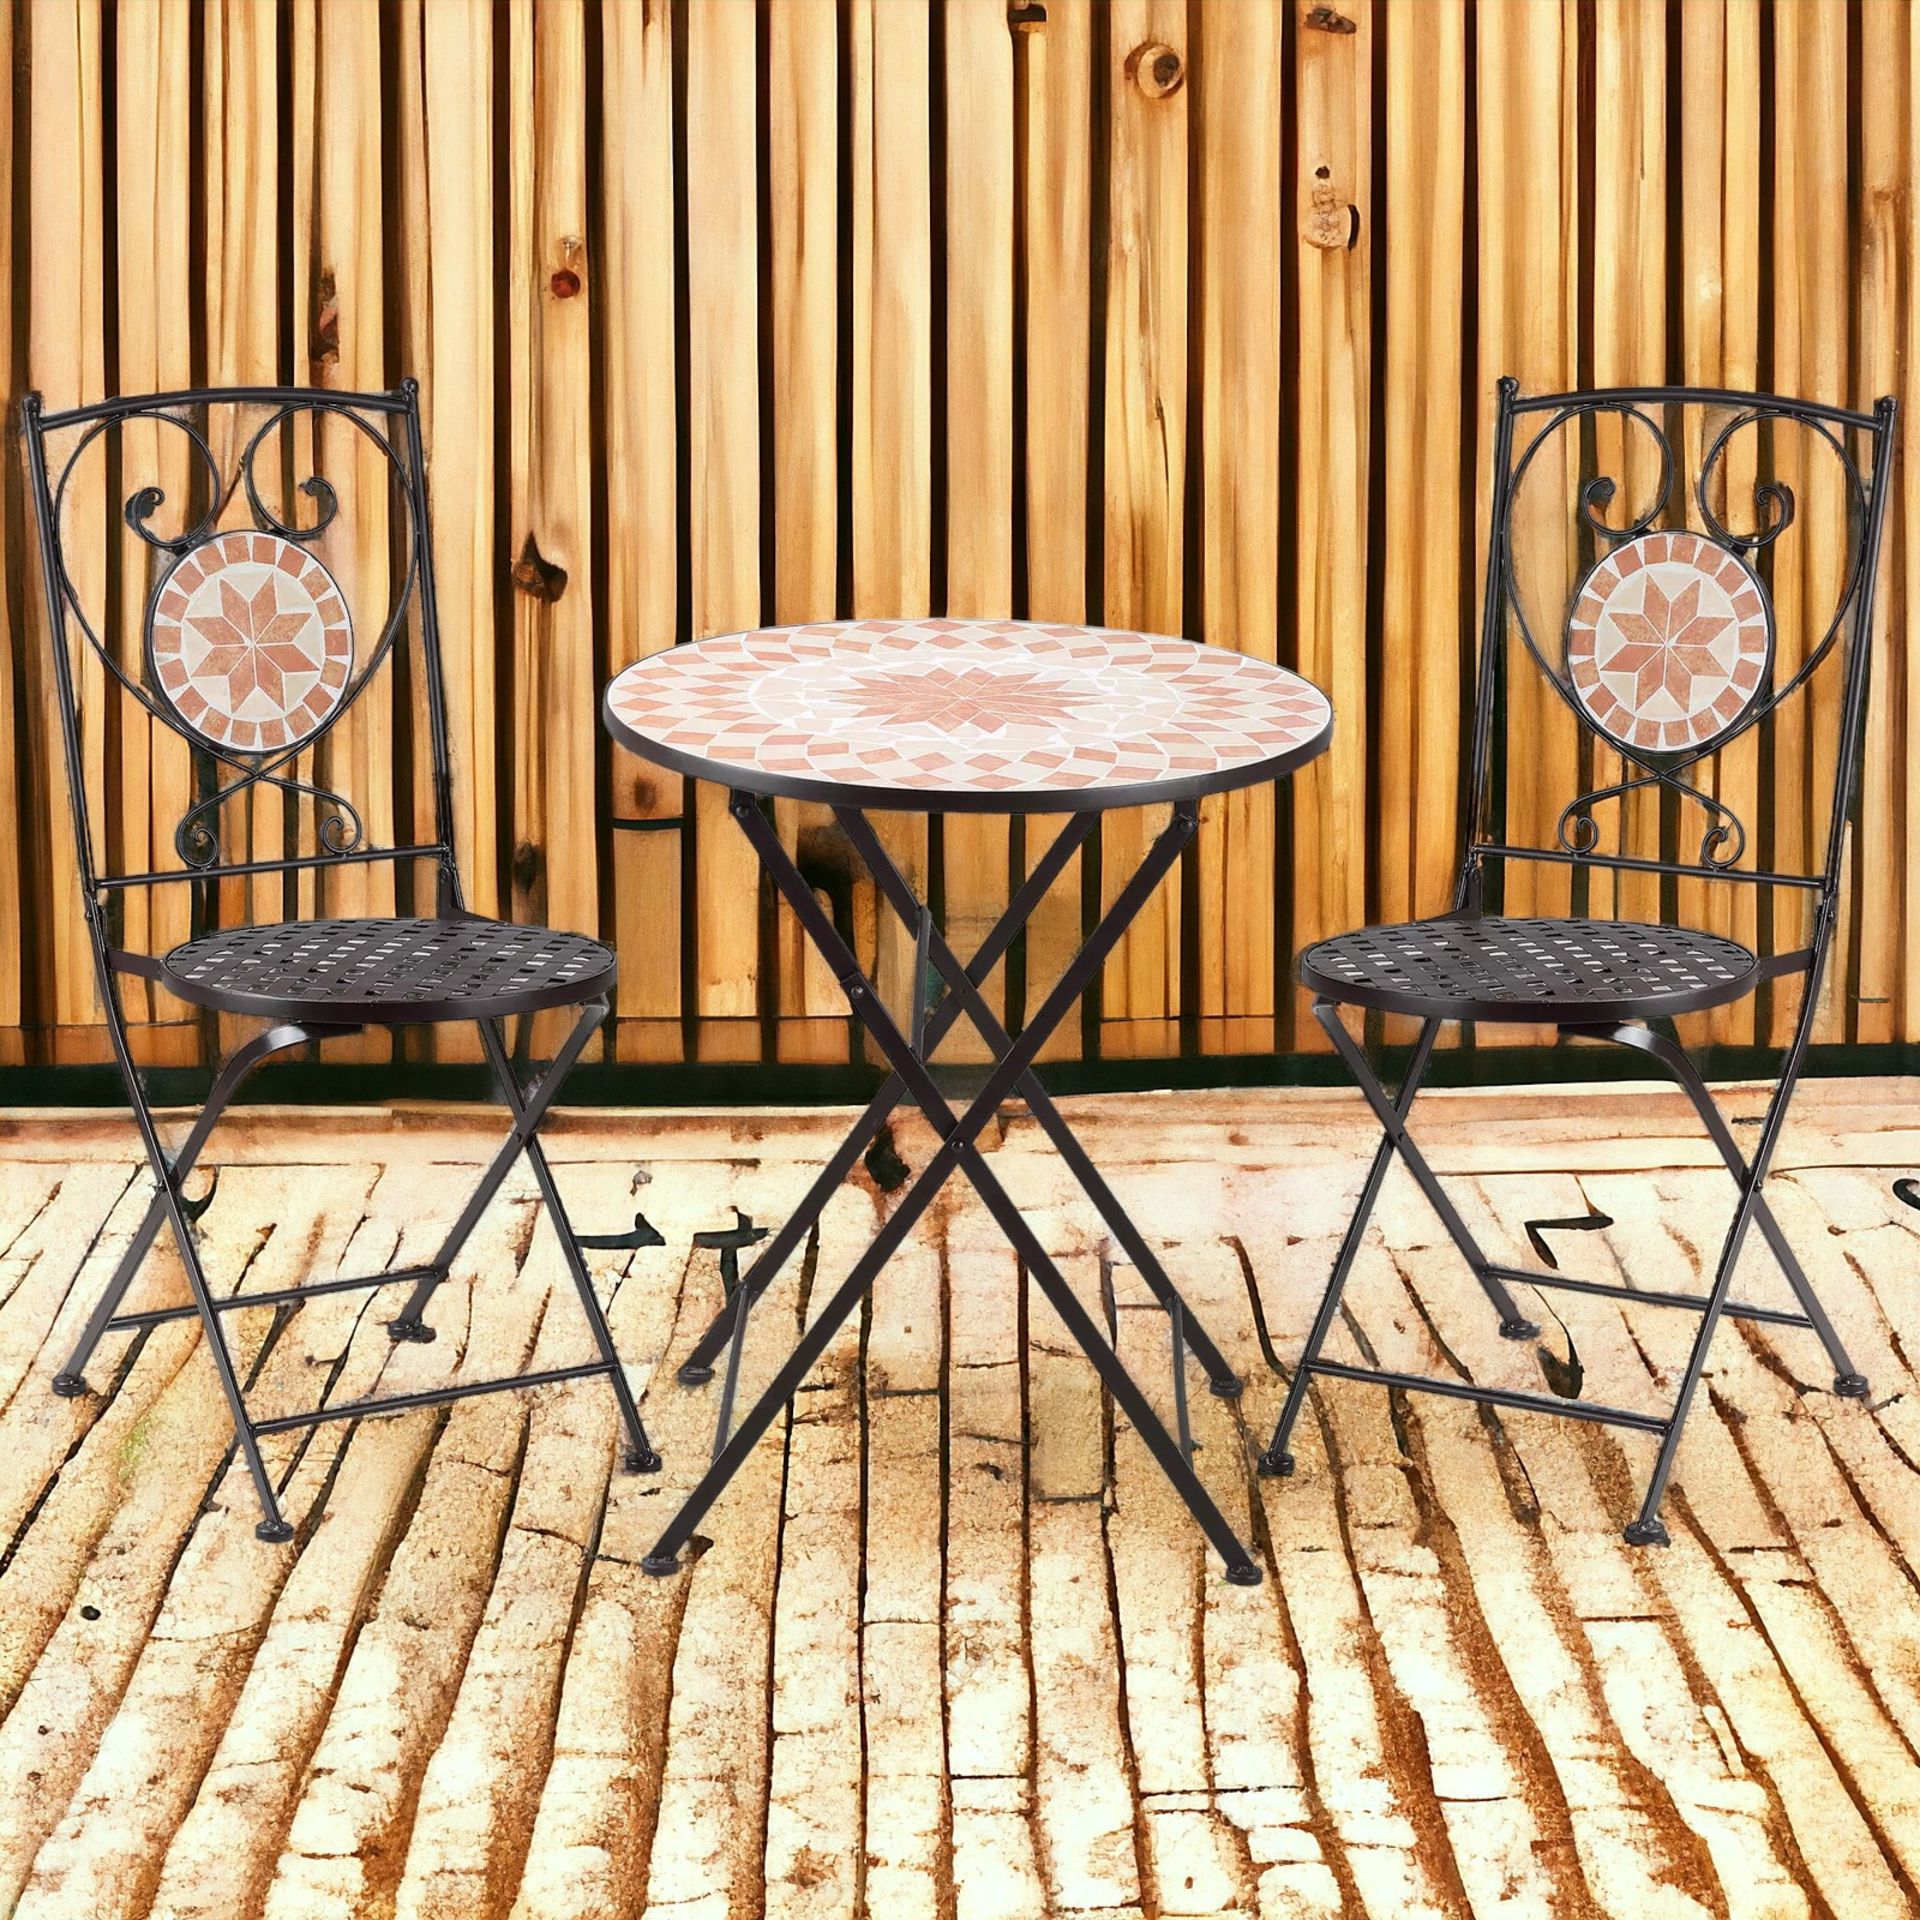 FREE DELIVERY-BRAND NEW 3-PIECE OUTDOOR BISTRO SET W/ MOSAIC ROUND TABLE AND 2 ARMLESS CHAIRS